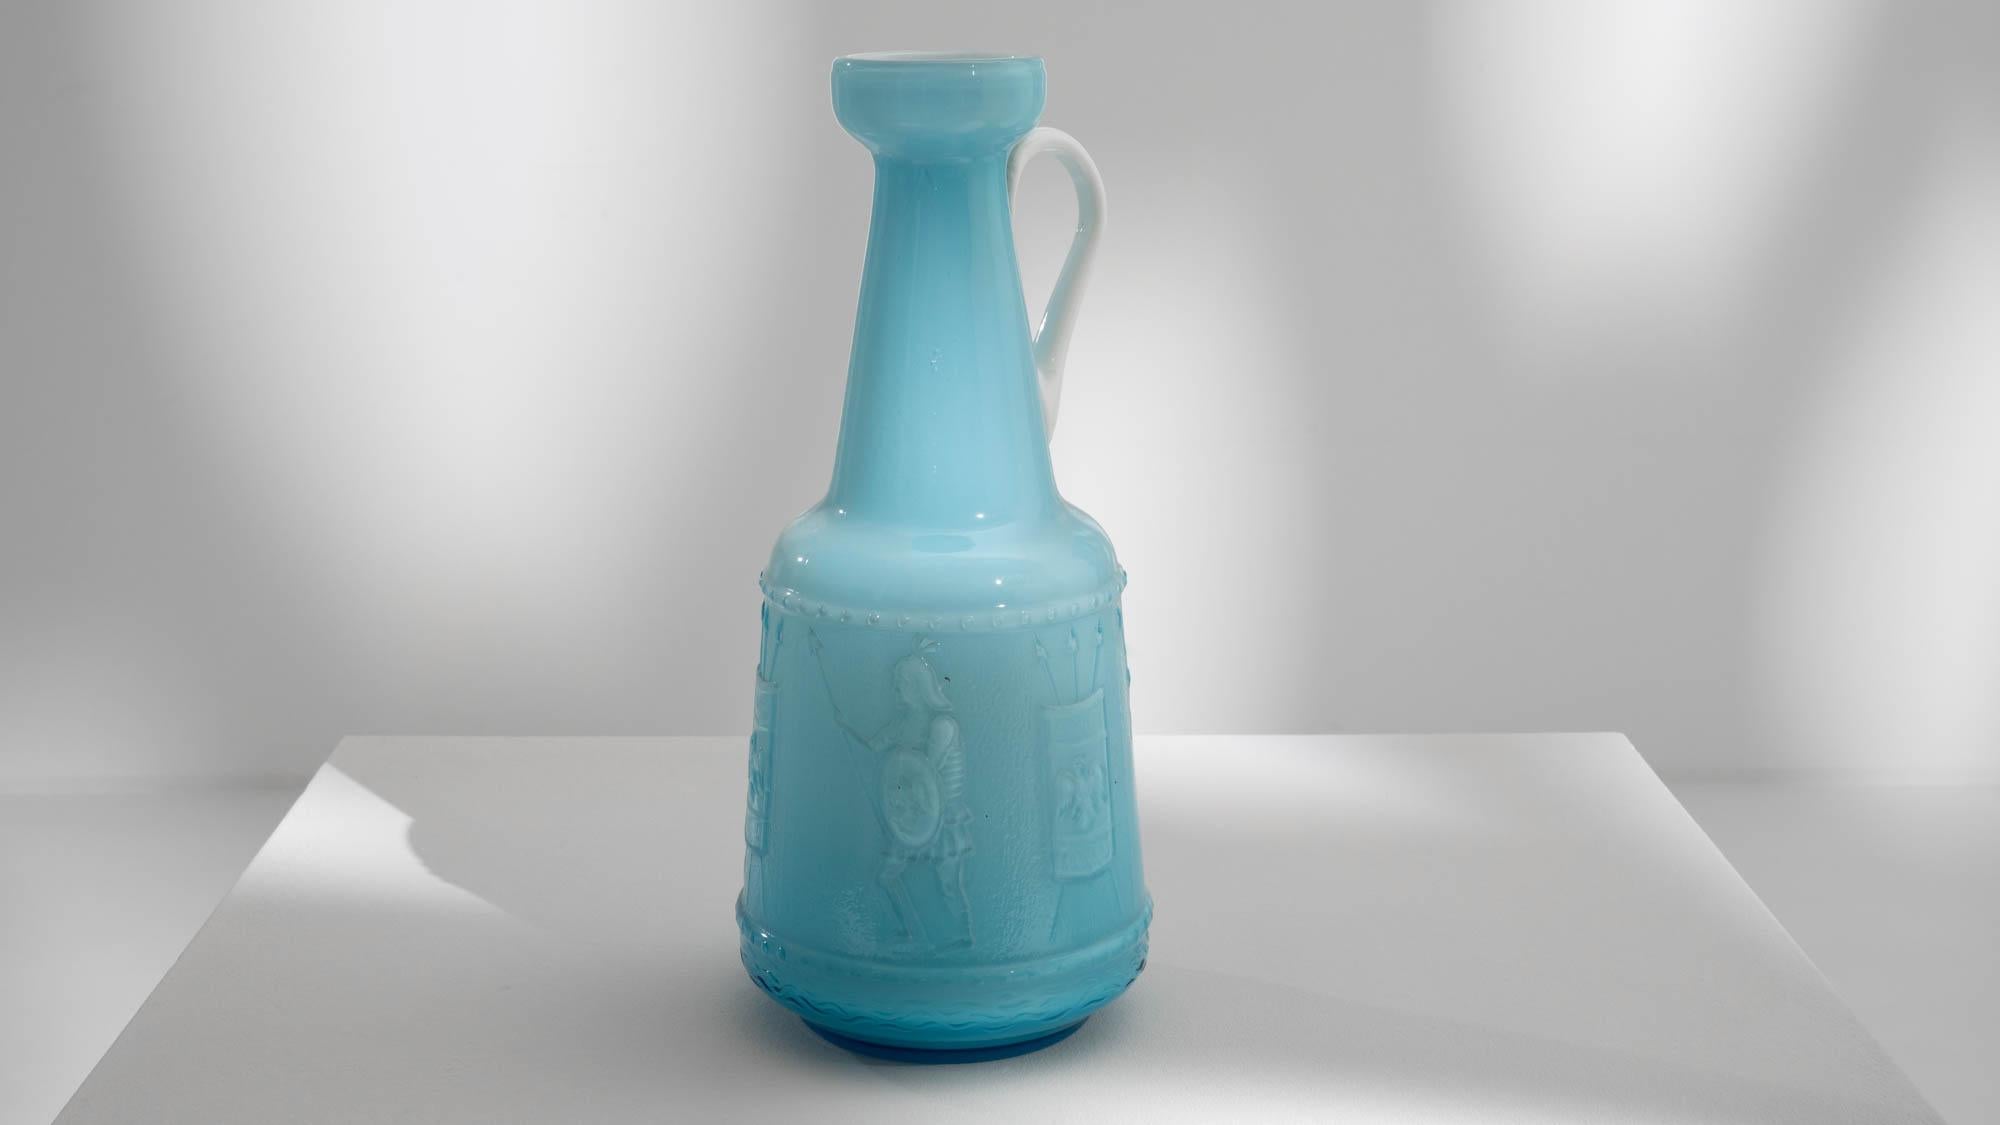 This 20th Century Italian Blue Glass Jug is a captivating piece featuring a Roman warrior preparing for battle. The intricate depiction showcases a figure from the Roman Empire holding a shield and spear, depicting a moment of historical intensity.